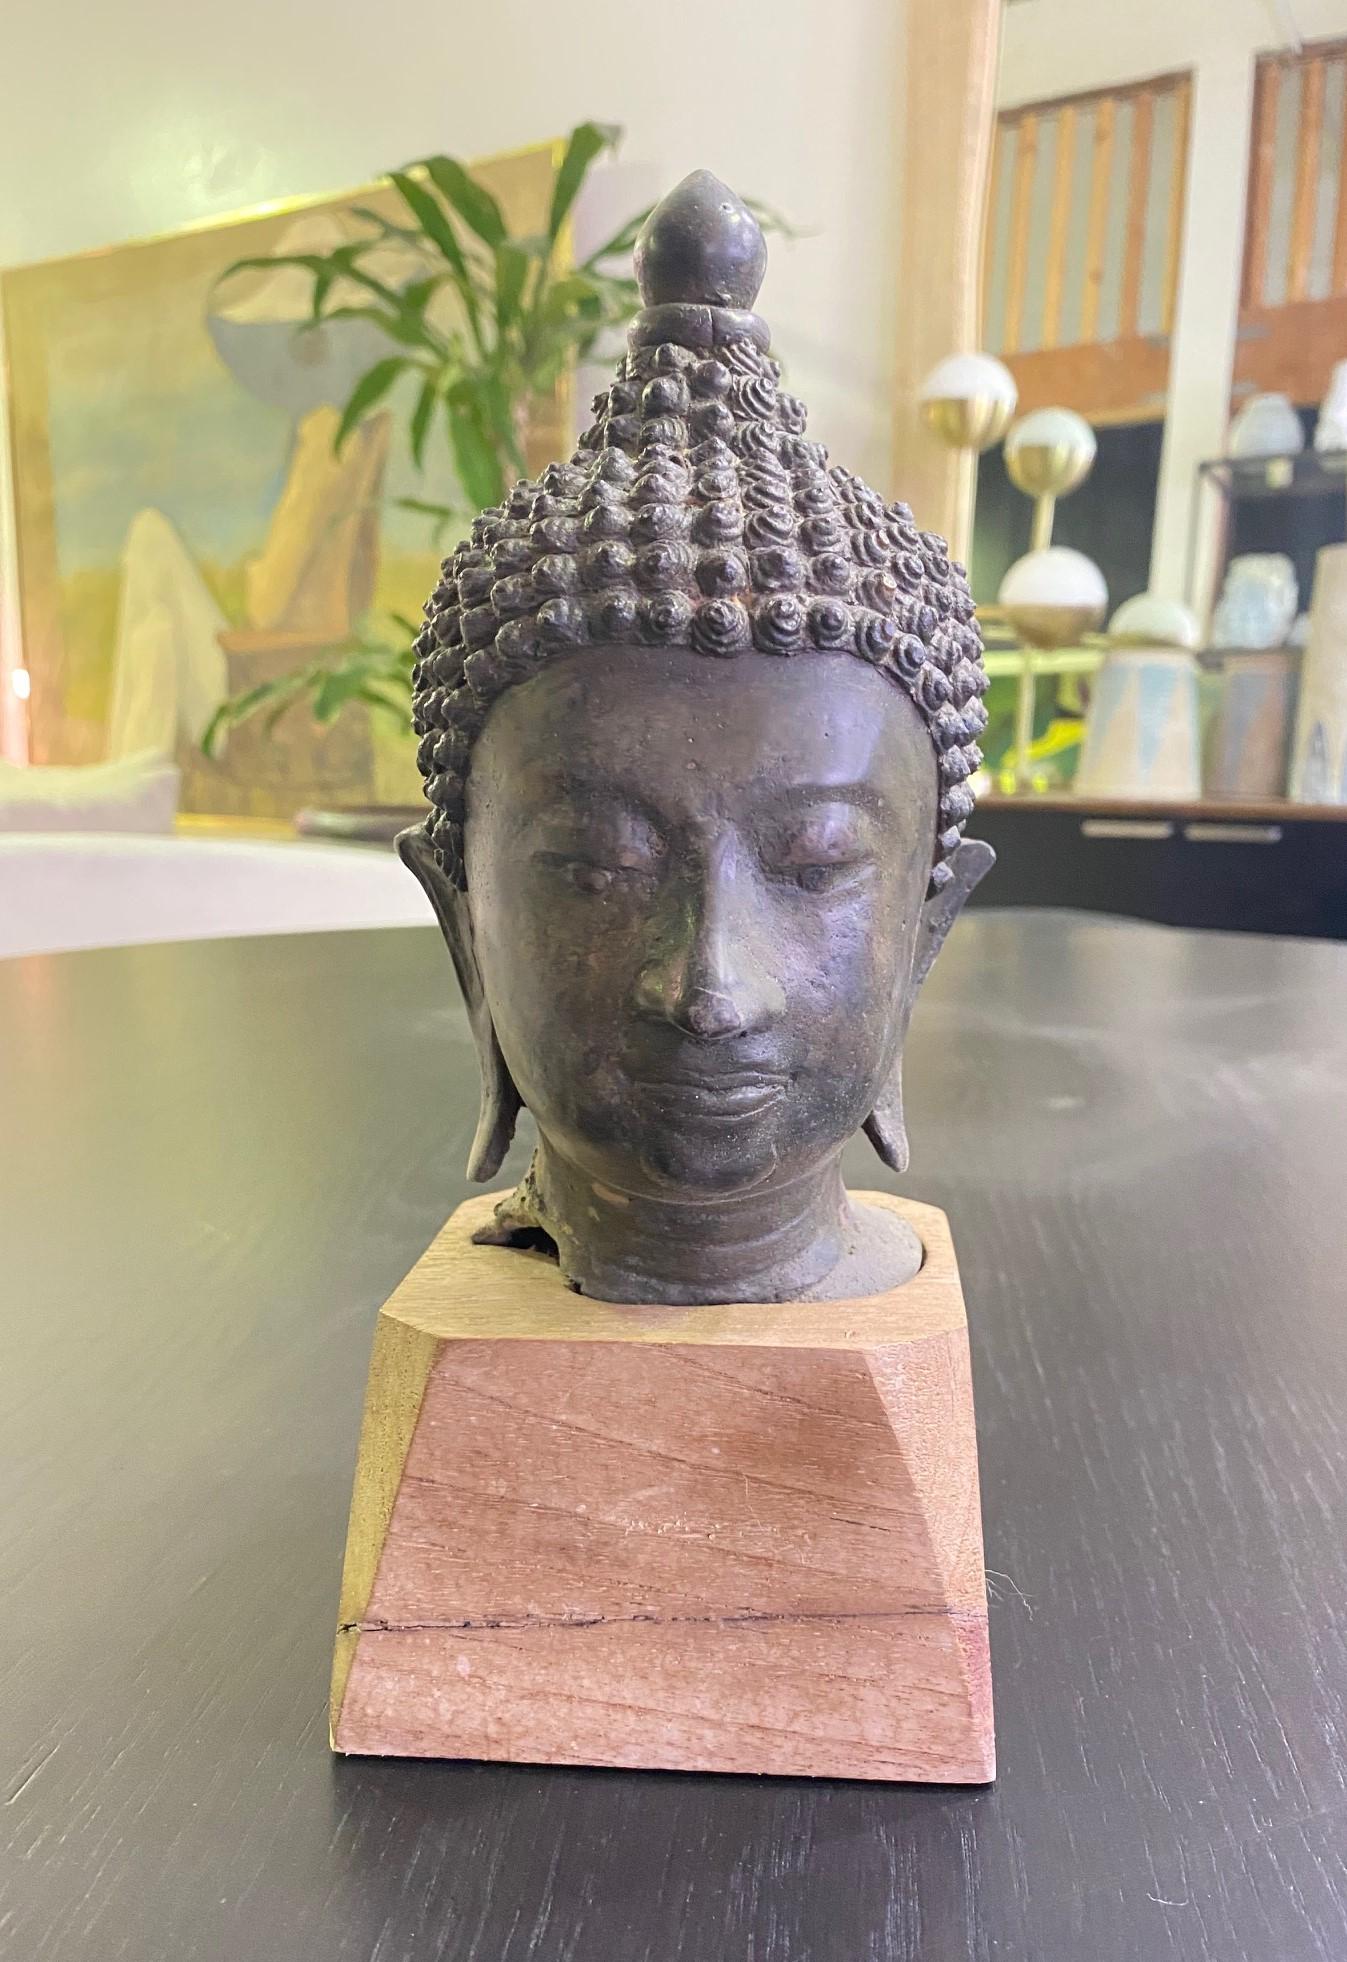 A wonderfully sculpted bronze Thai/ Siam Buddha head on a custom-made wood stand. The Buddha's eyes are closed in serene meditation. The piece has a nice feel and heft to it and fits snuggly into the custom-fitted wood stand. Very well crafted with